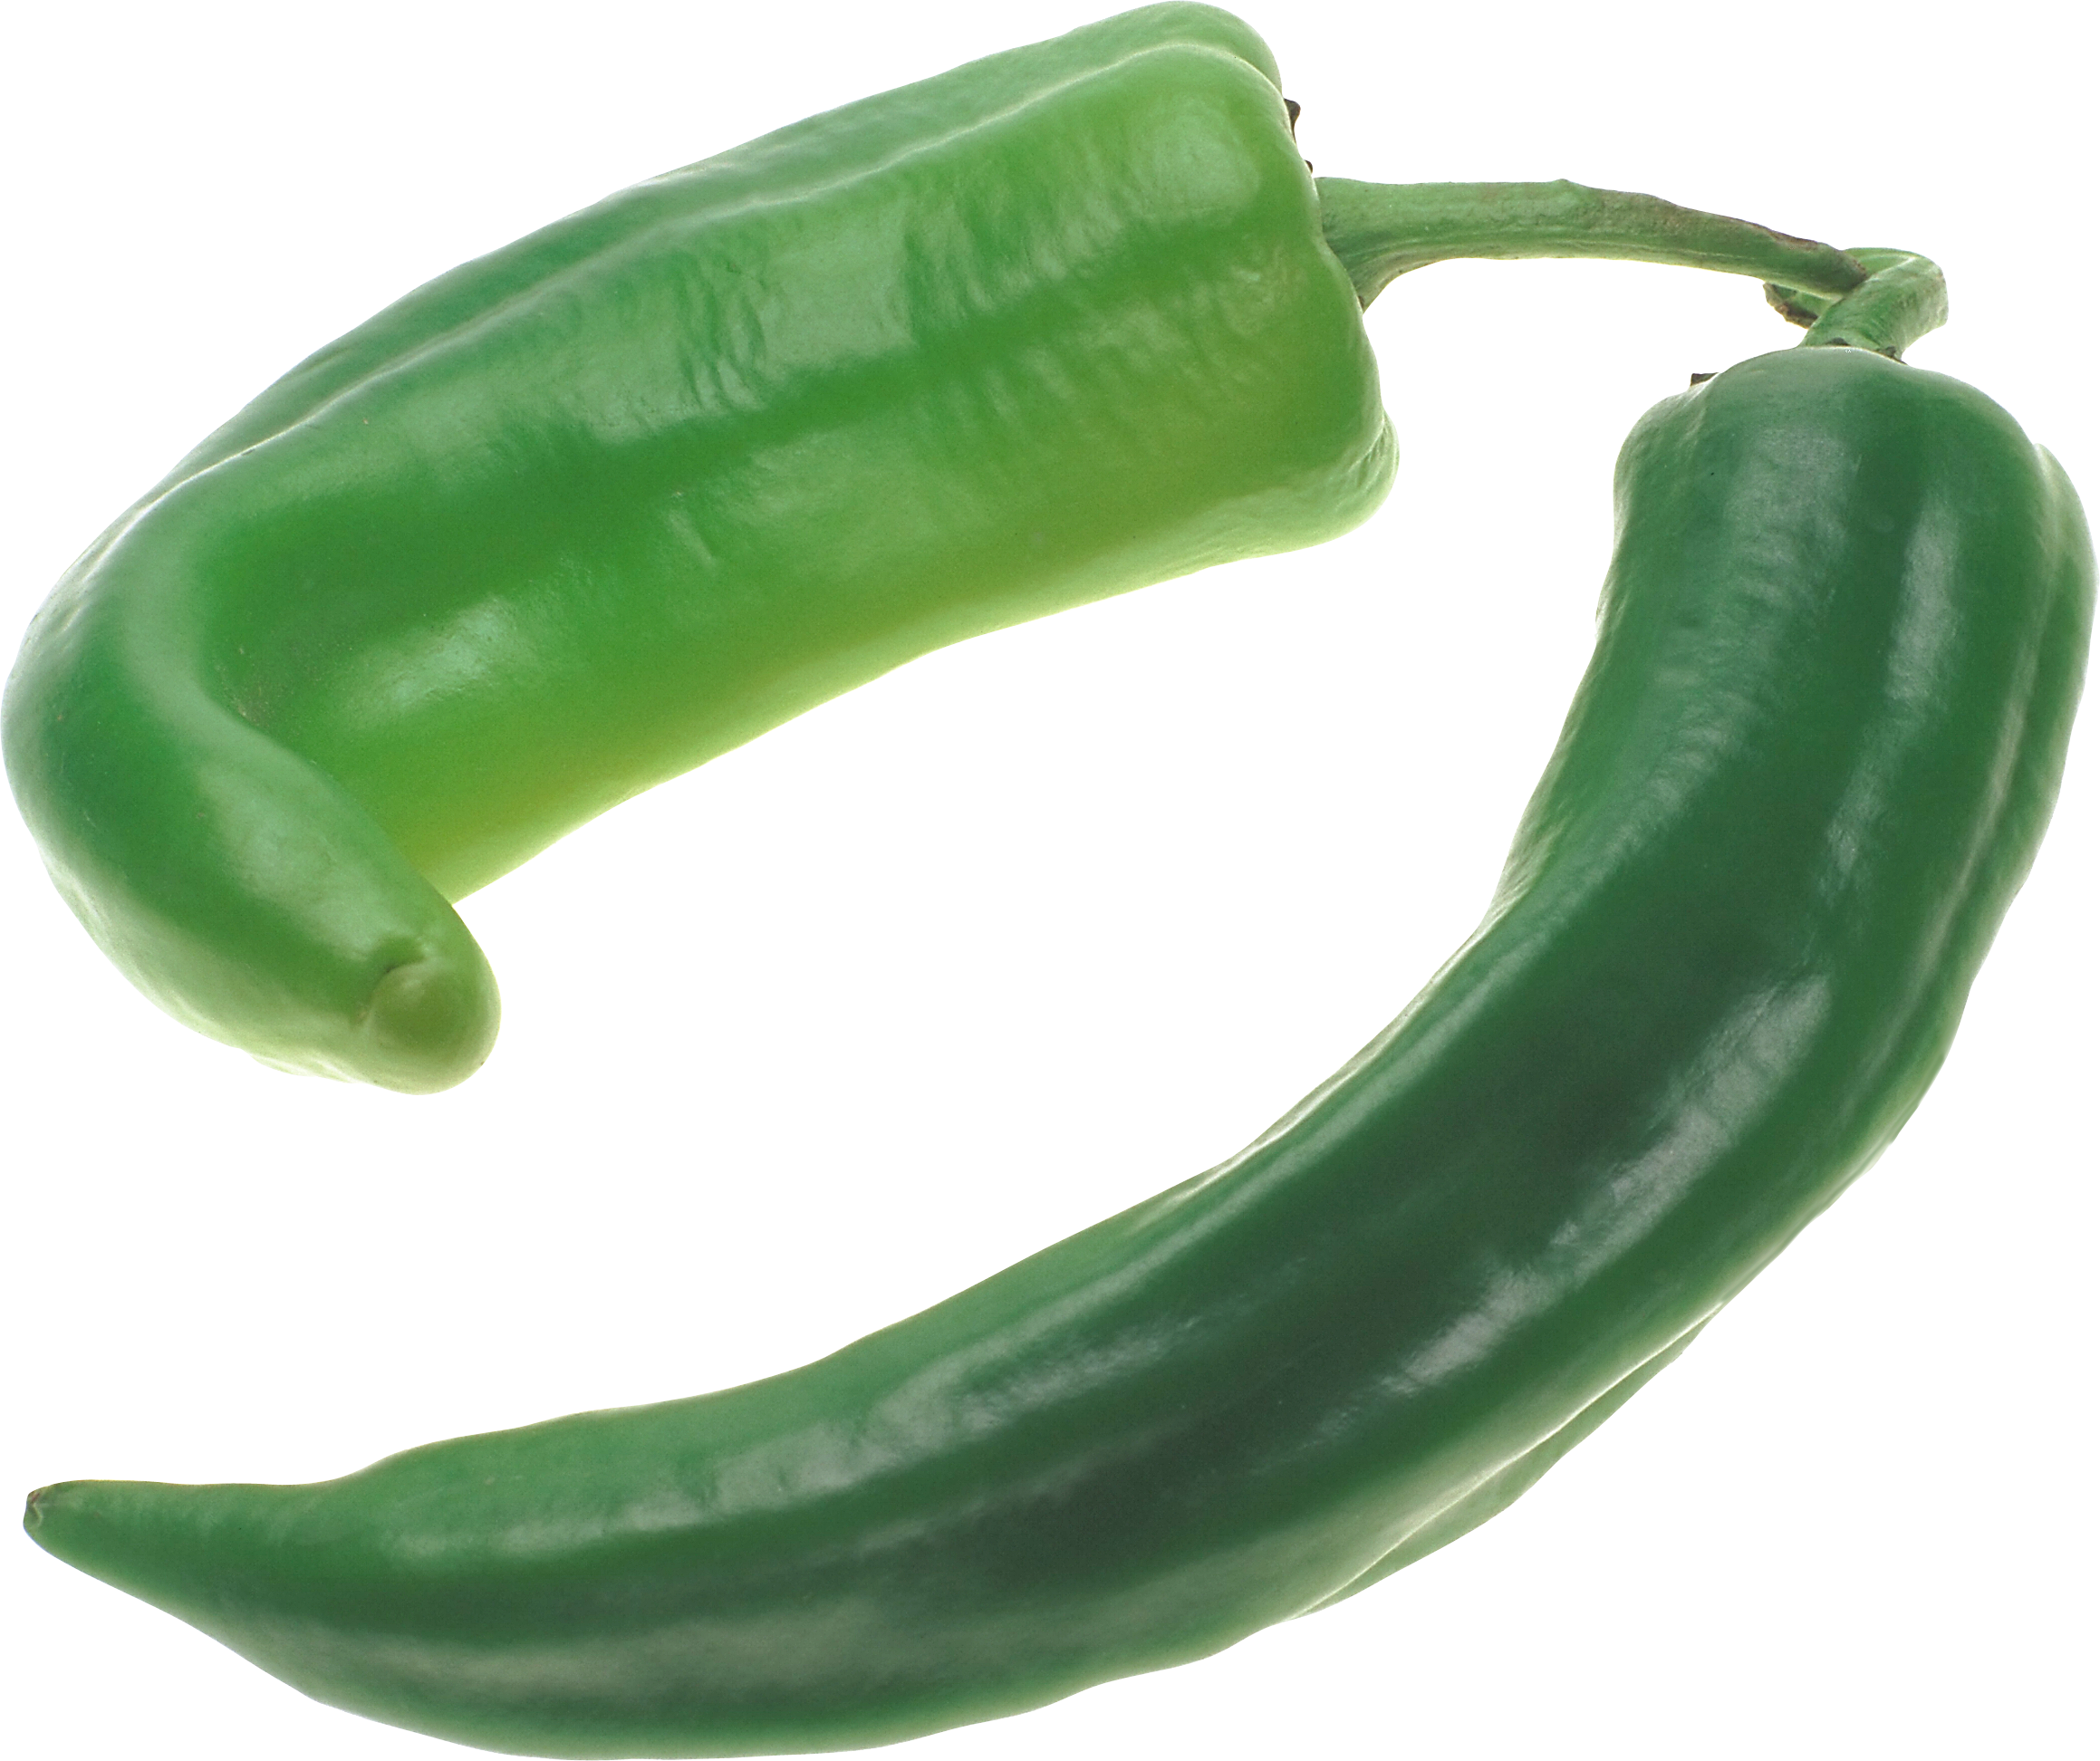 Green Pepper PNG Image